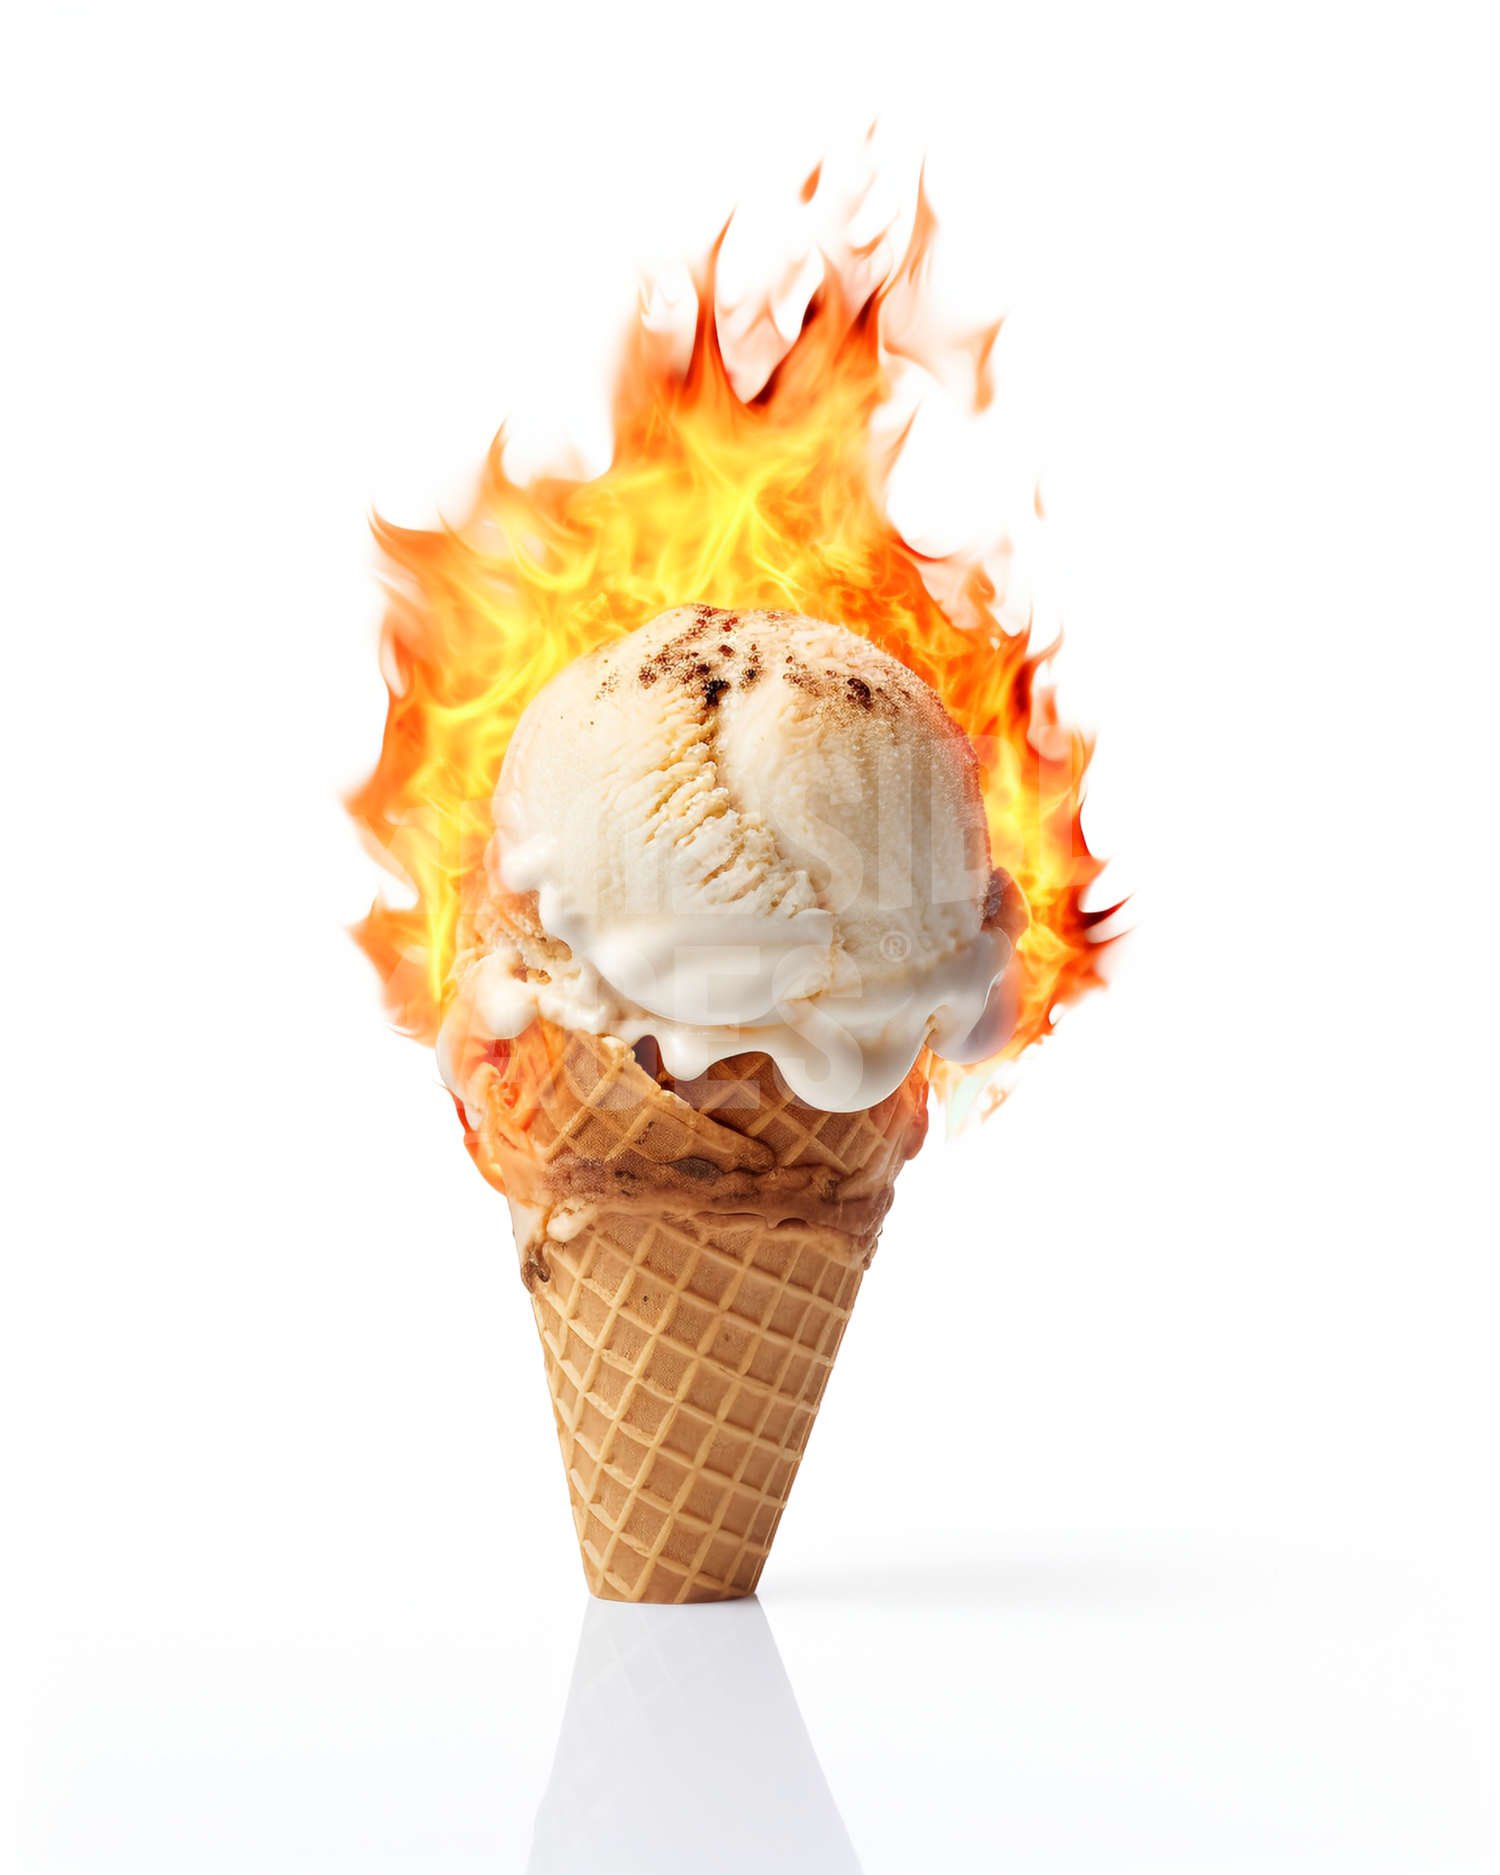 An ice cream cone on fire on a white background